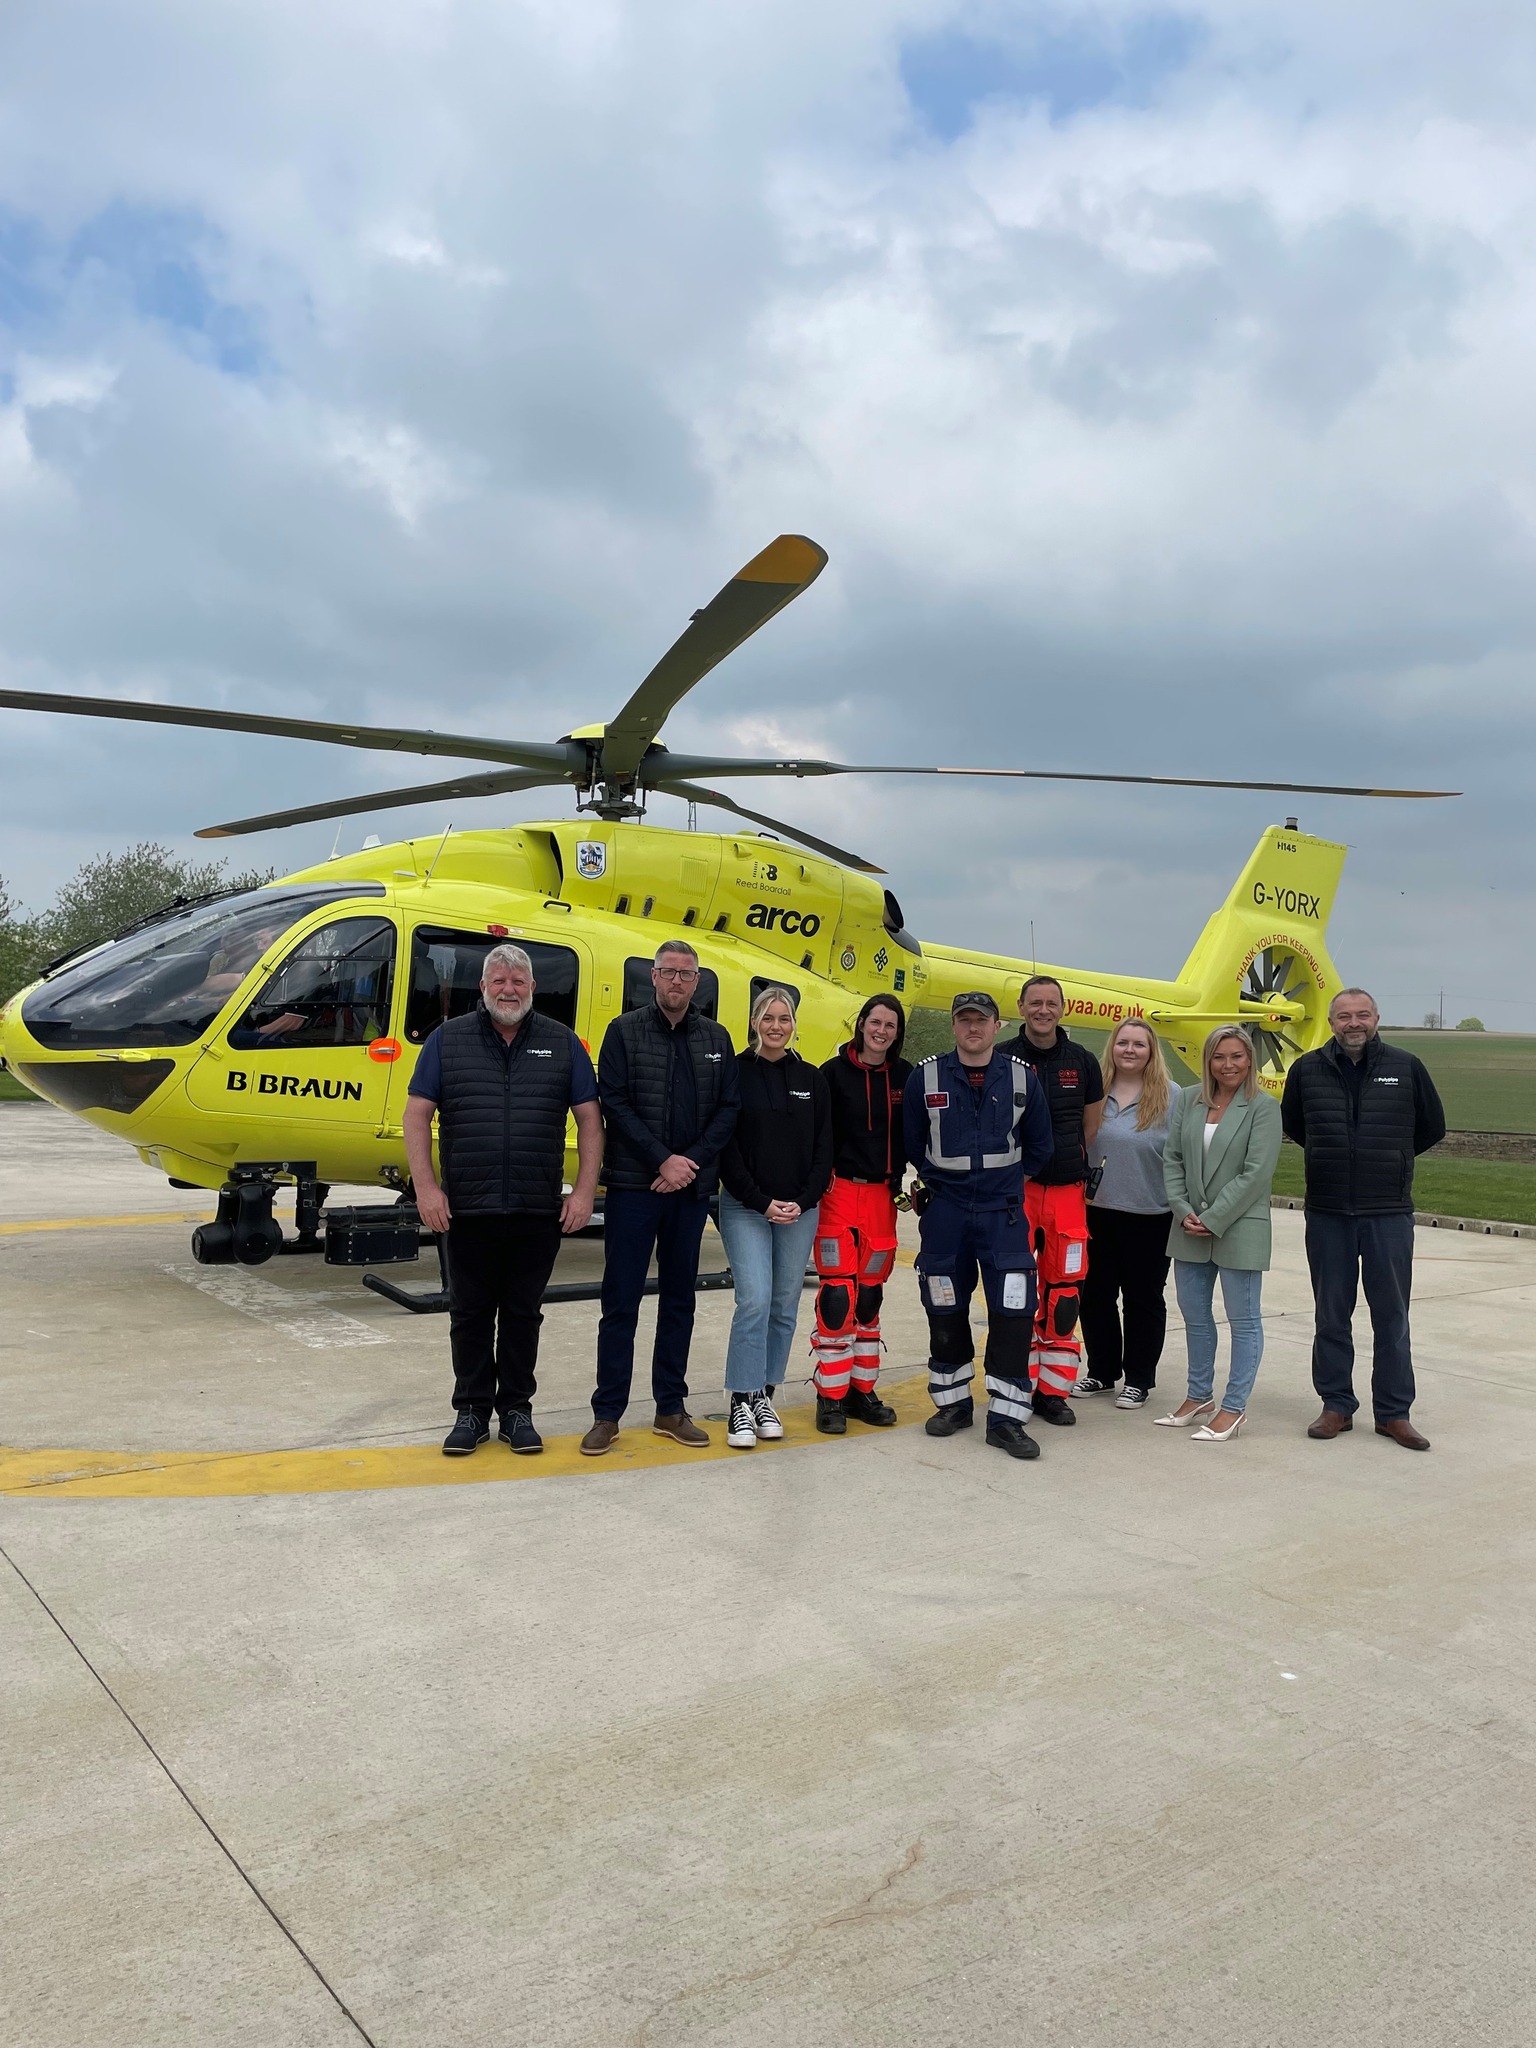 The team from Polypipe Building Products stand in front of a yellow helicopter which belongs to the charity, Yorkshire Air Ambulance